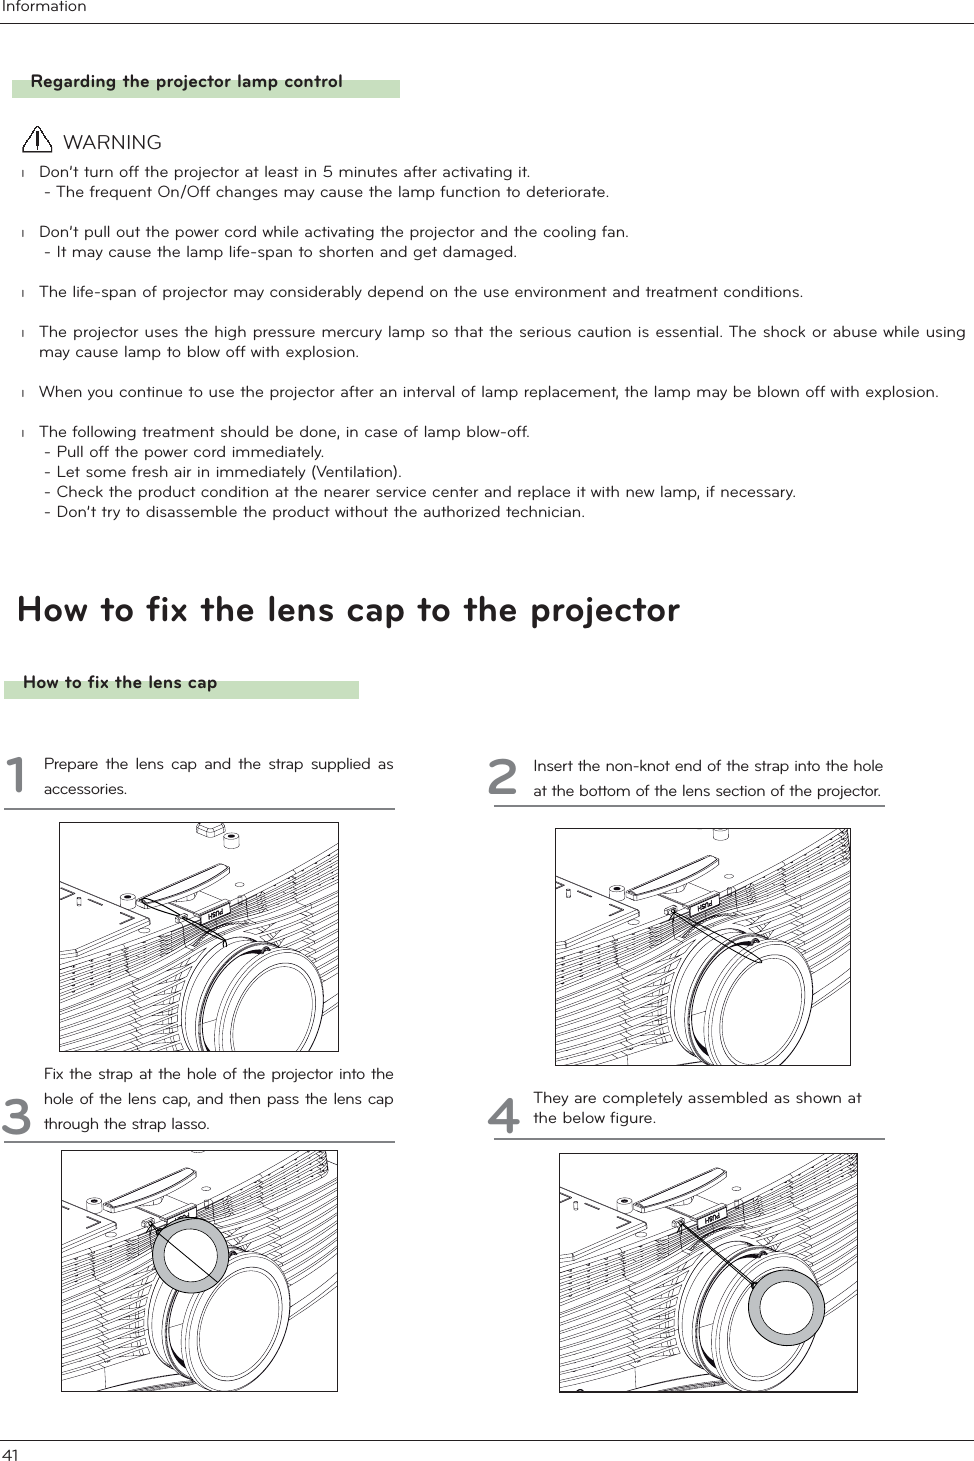 Information41How to fix the lens cap to the projectorHow to fix the lens cap1Prepare the lens cap and the strap supplied as accessories. 2Insert the non-knot end of the strap into the hole at the bottom of the lens section of the projector.3Fix the strap at the hole of the projector into the hole of the lens cap, and then pass the lens cap through the strap lasso. 4They are completely assembled as shown at the below figure. Regarding the projector lamp control l  Don’t turn off the projector at least in 5 minutes after activating it.     - The frequent On/Off changes may cause the lamp function to deteriorate.l  Don’t pull out the power cord while activating the projector and the cooling fan.     - It may cause the lamp life-span to shorten and get damaged. l  The life-span of projector may considerably depend on the use environment and treatment conditions. l  The projector uses the high pressure mercury lamp so that the serious caution is essential. The shock or abuse while using may cause lamp to blow off with explosion. l  When you continue to use the projector after an interval of lamp replacement, the lamp may be blown off with explosion.l  The following treatment should be done, in case of lamp blow-off.    - Pull off the power cord immediately.    - Let some fresh air in immediately (Ventilation).    - Check the product condition at the nearer service center and replace it with new lamp, if necessary.     - Don’t try to disassemble the product without the authorized technician.  WARNING